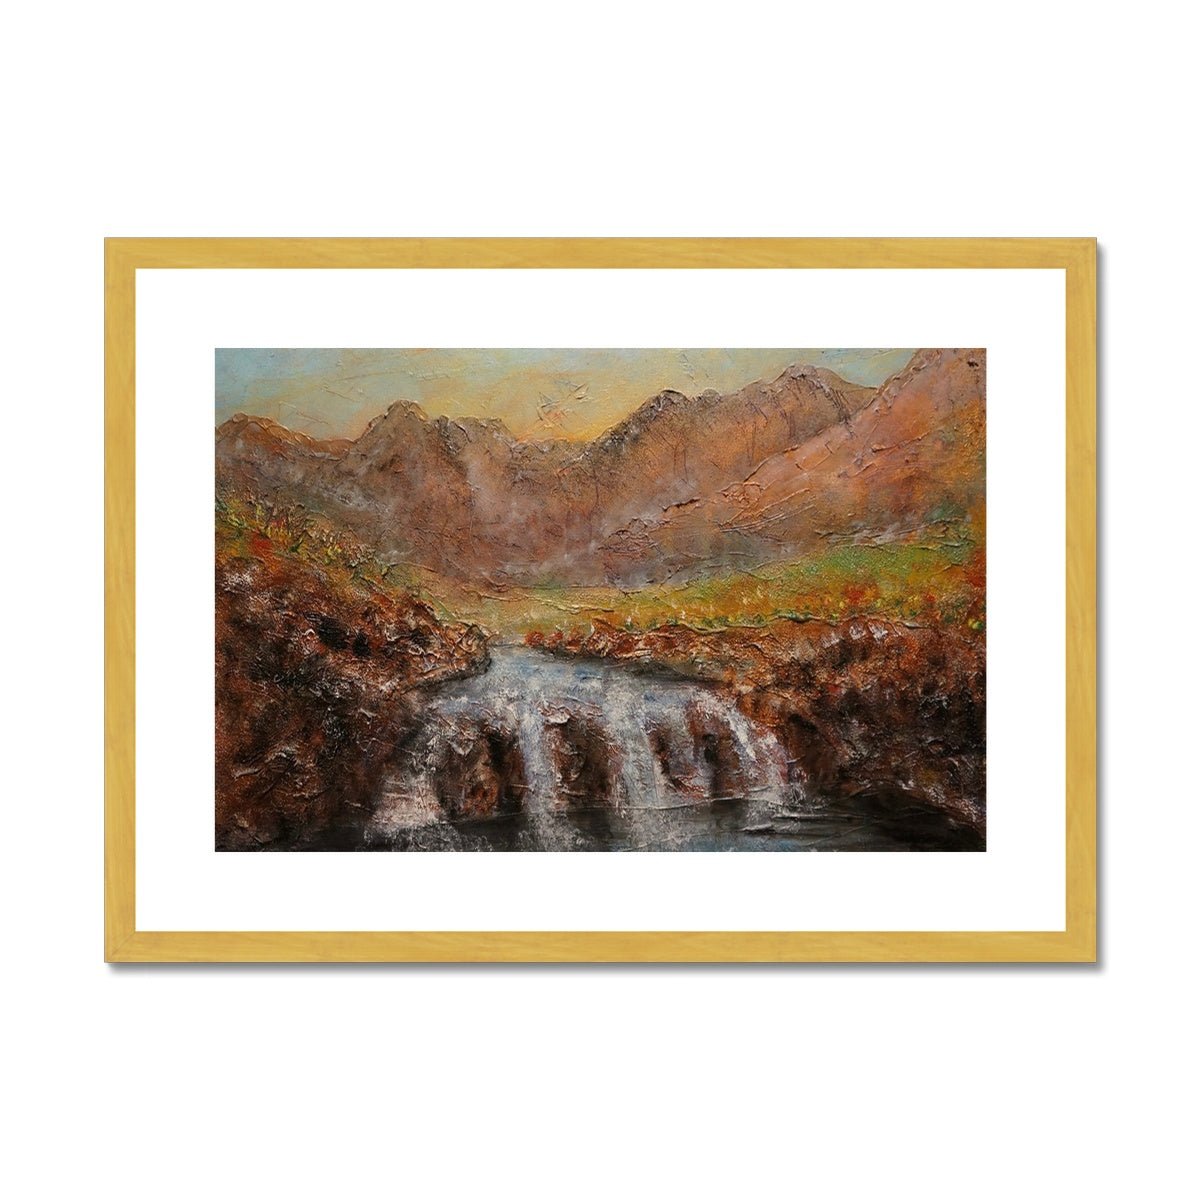 Fairy Pools Dawn Skye Painting | Antique Framed & Mounted Prints From Scotland-Antique Framed & Mounted Prints-Skye Art Gallery-A2 Landscape-Gold Frame-Paintings, Prints, Homeware, Art Gifts From Scotland By Scottish Artist Kevin Hunter